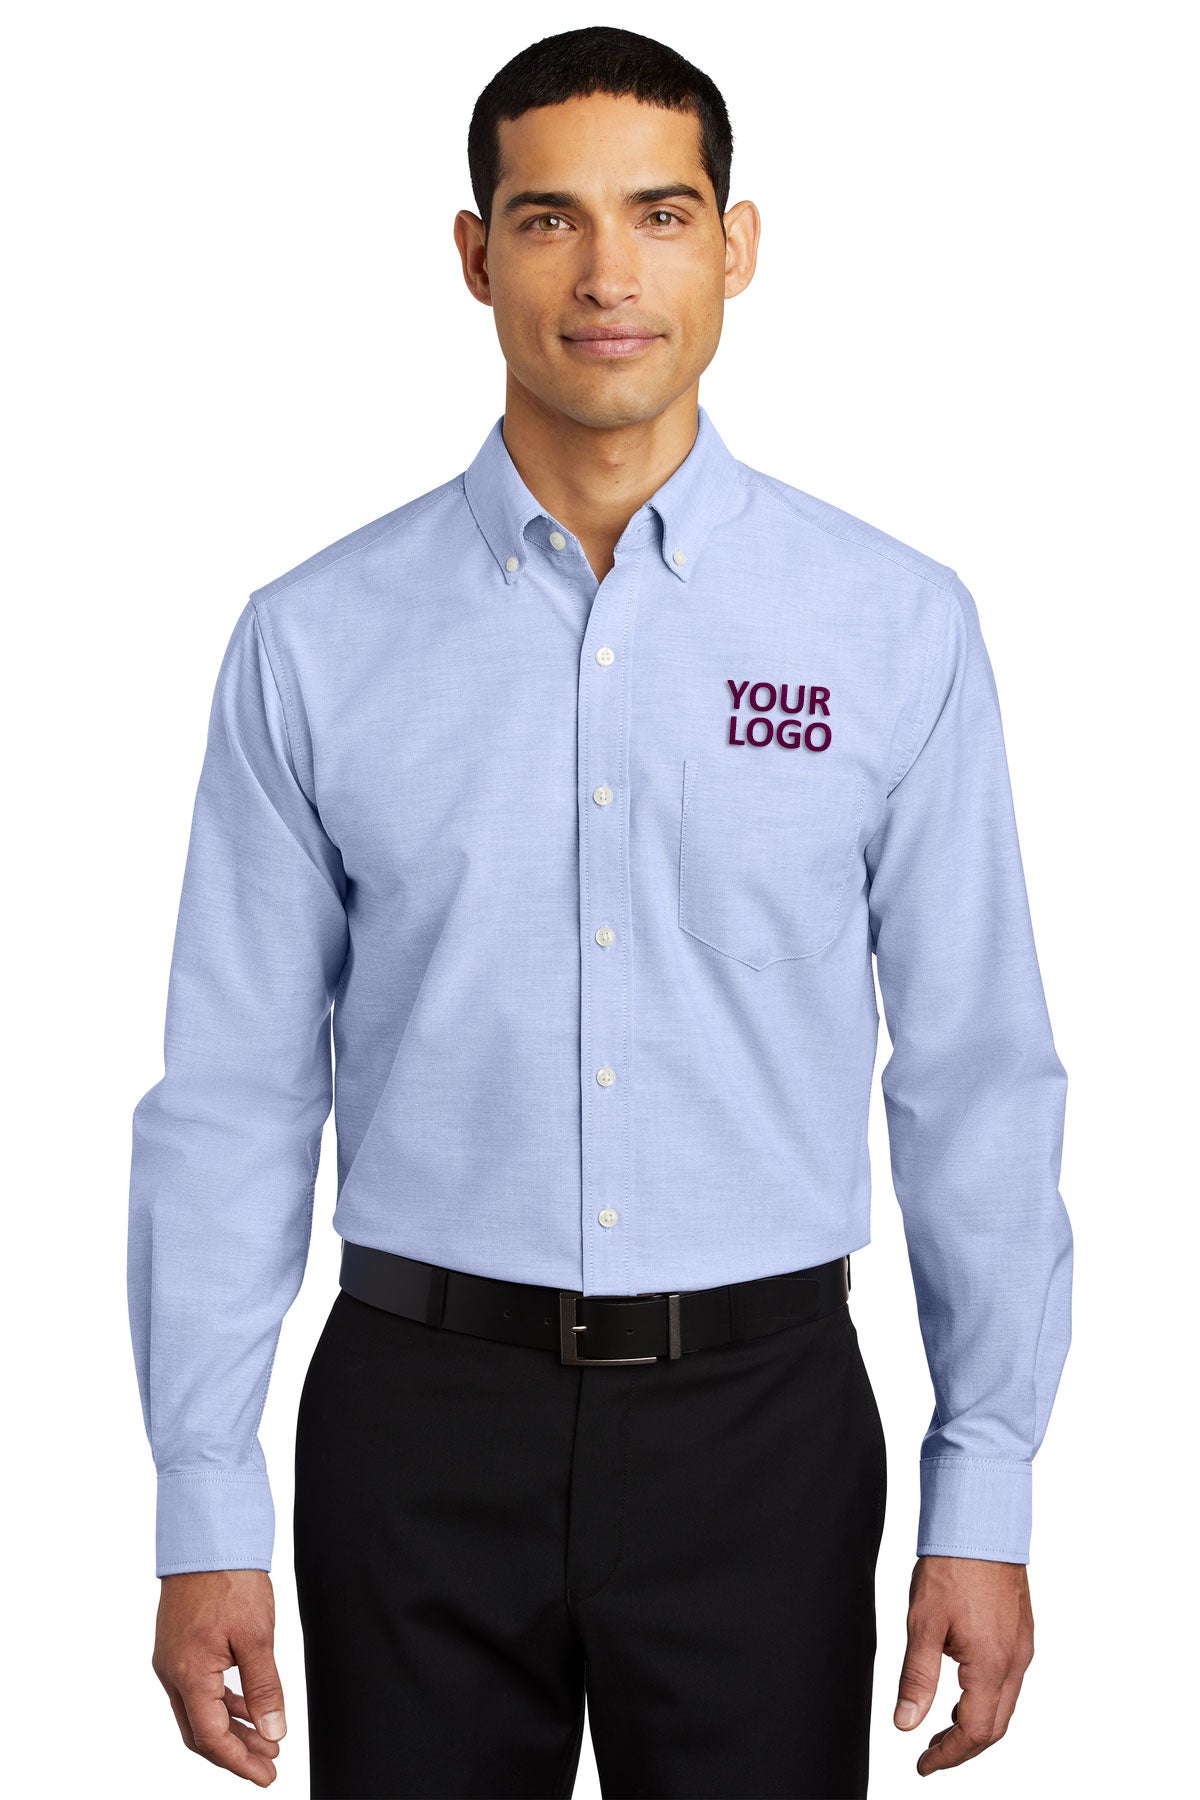 Port Authority Oxford Blue S658 custom corporate clothing